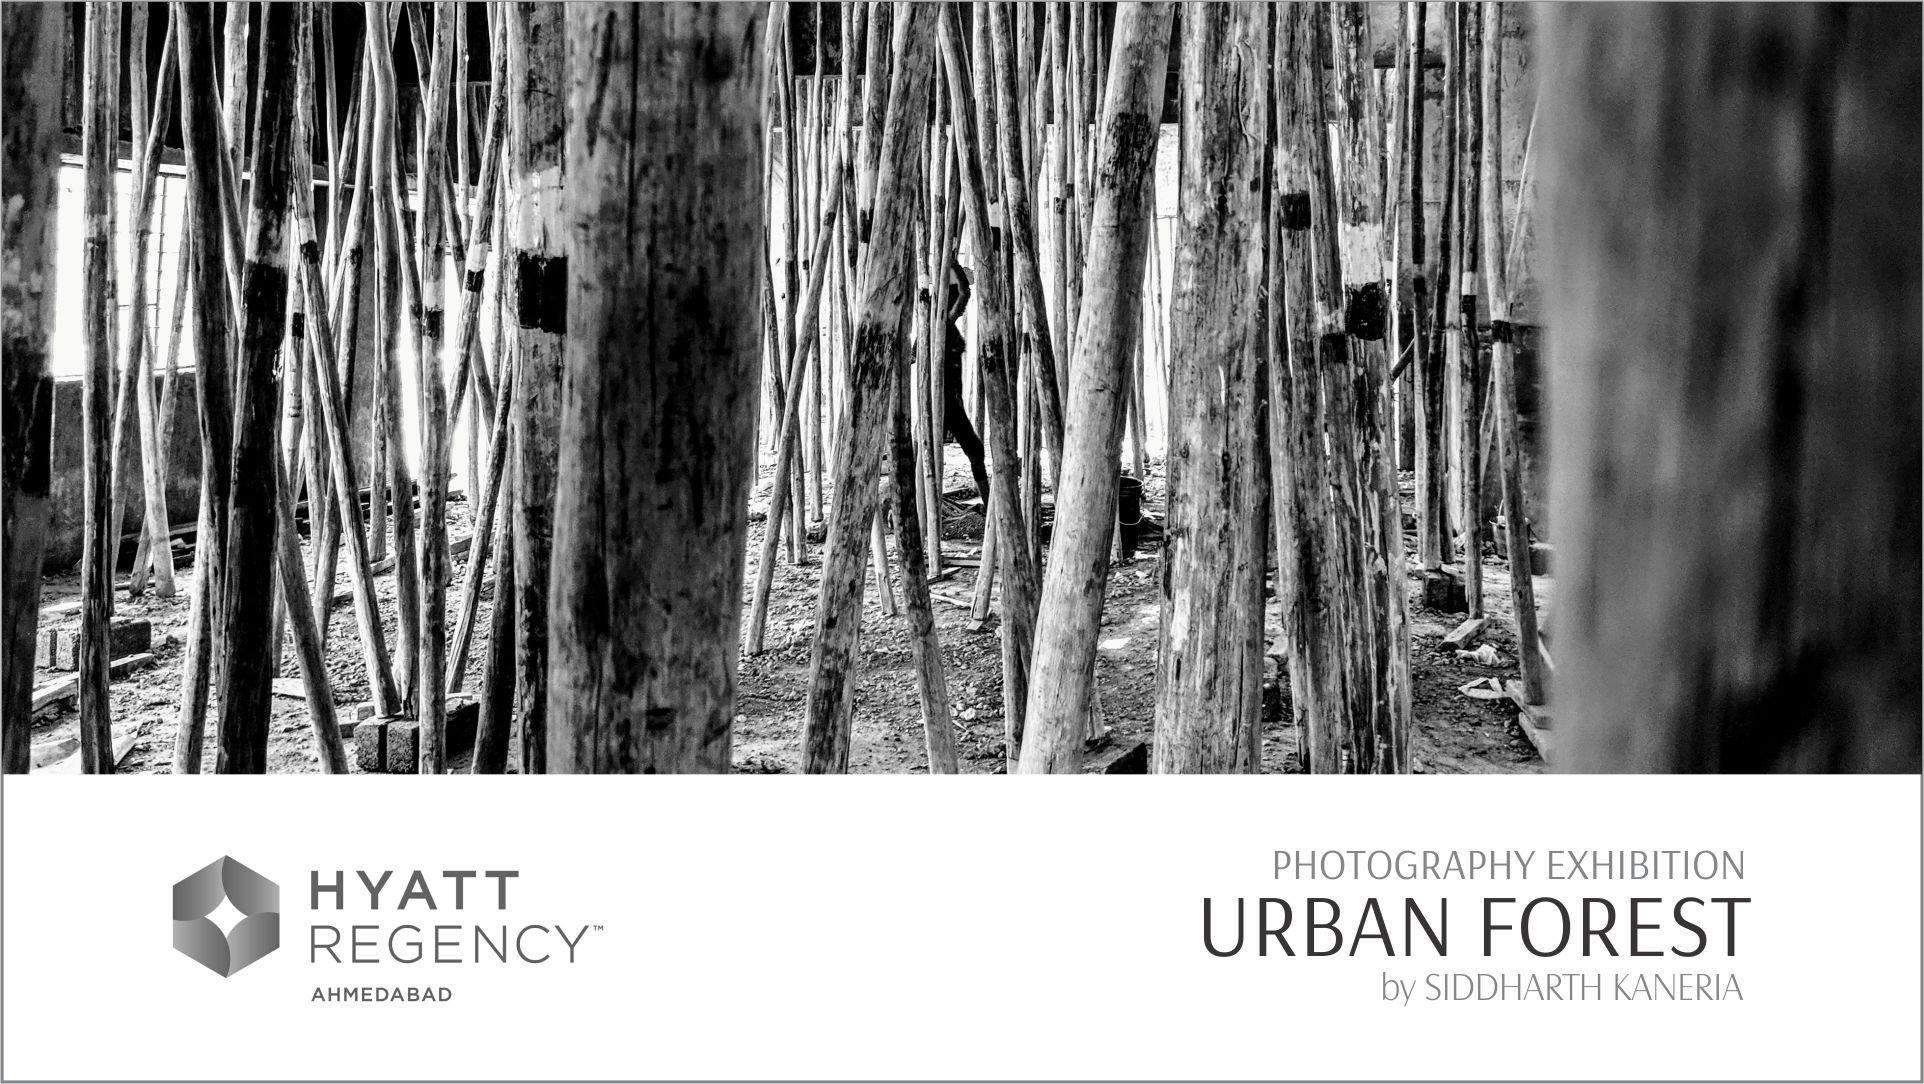 https://creativeyatra.com/wp-content/uploads/2019/10/Urban-Forests-Photography-Exhibition.jpg